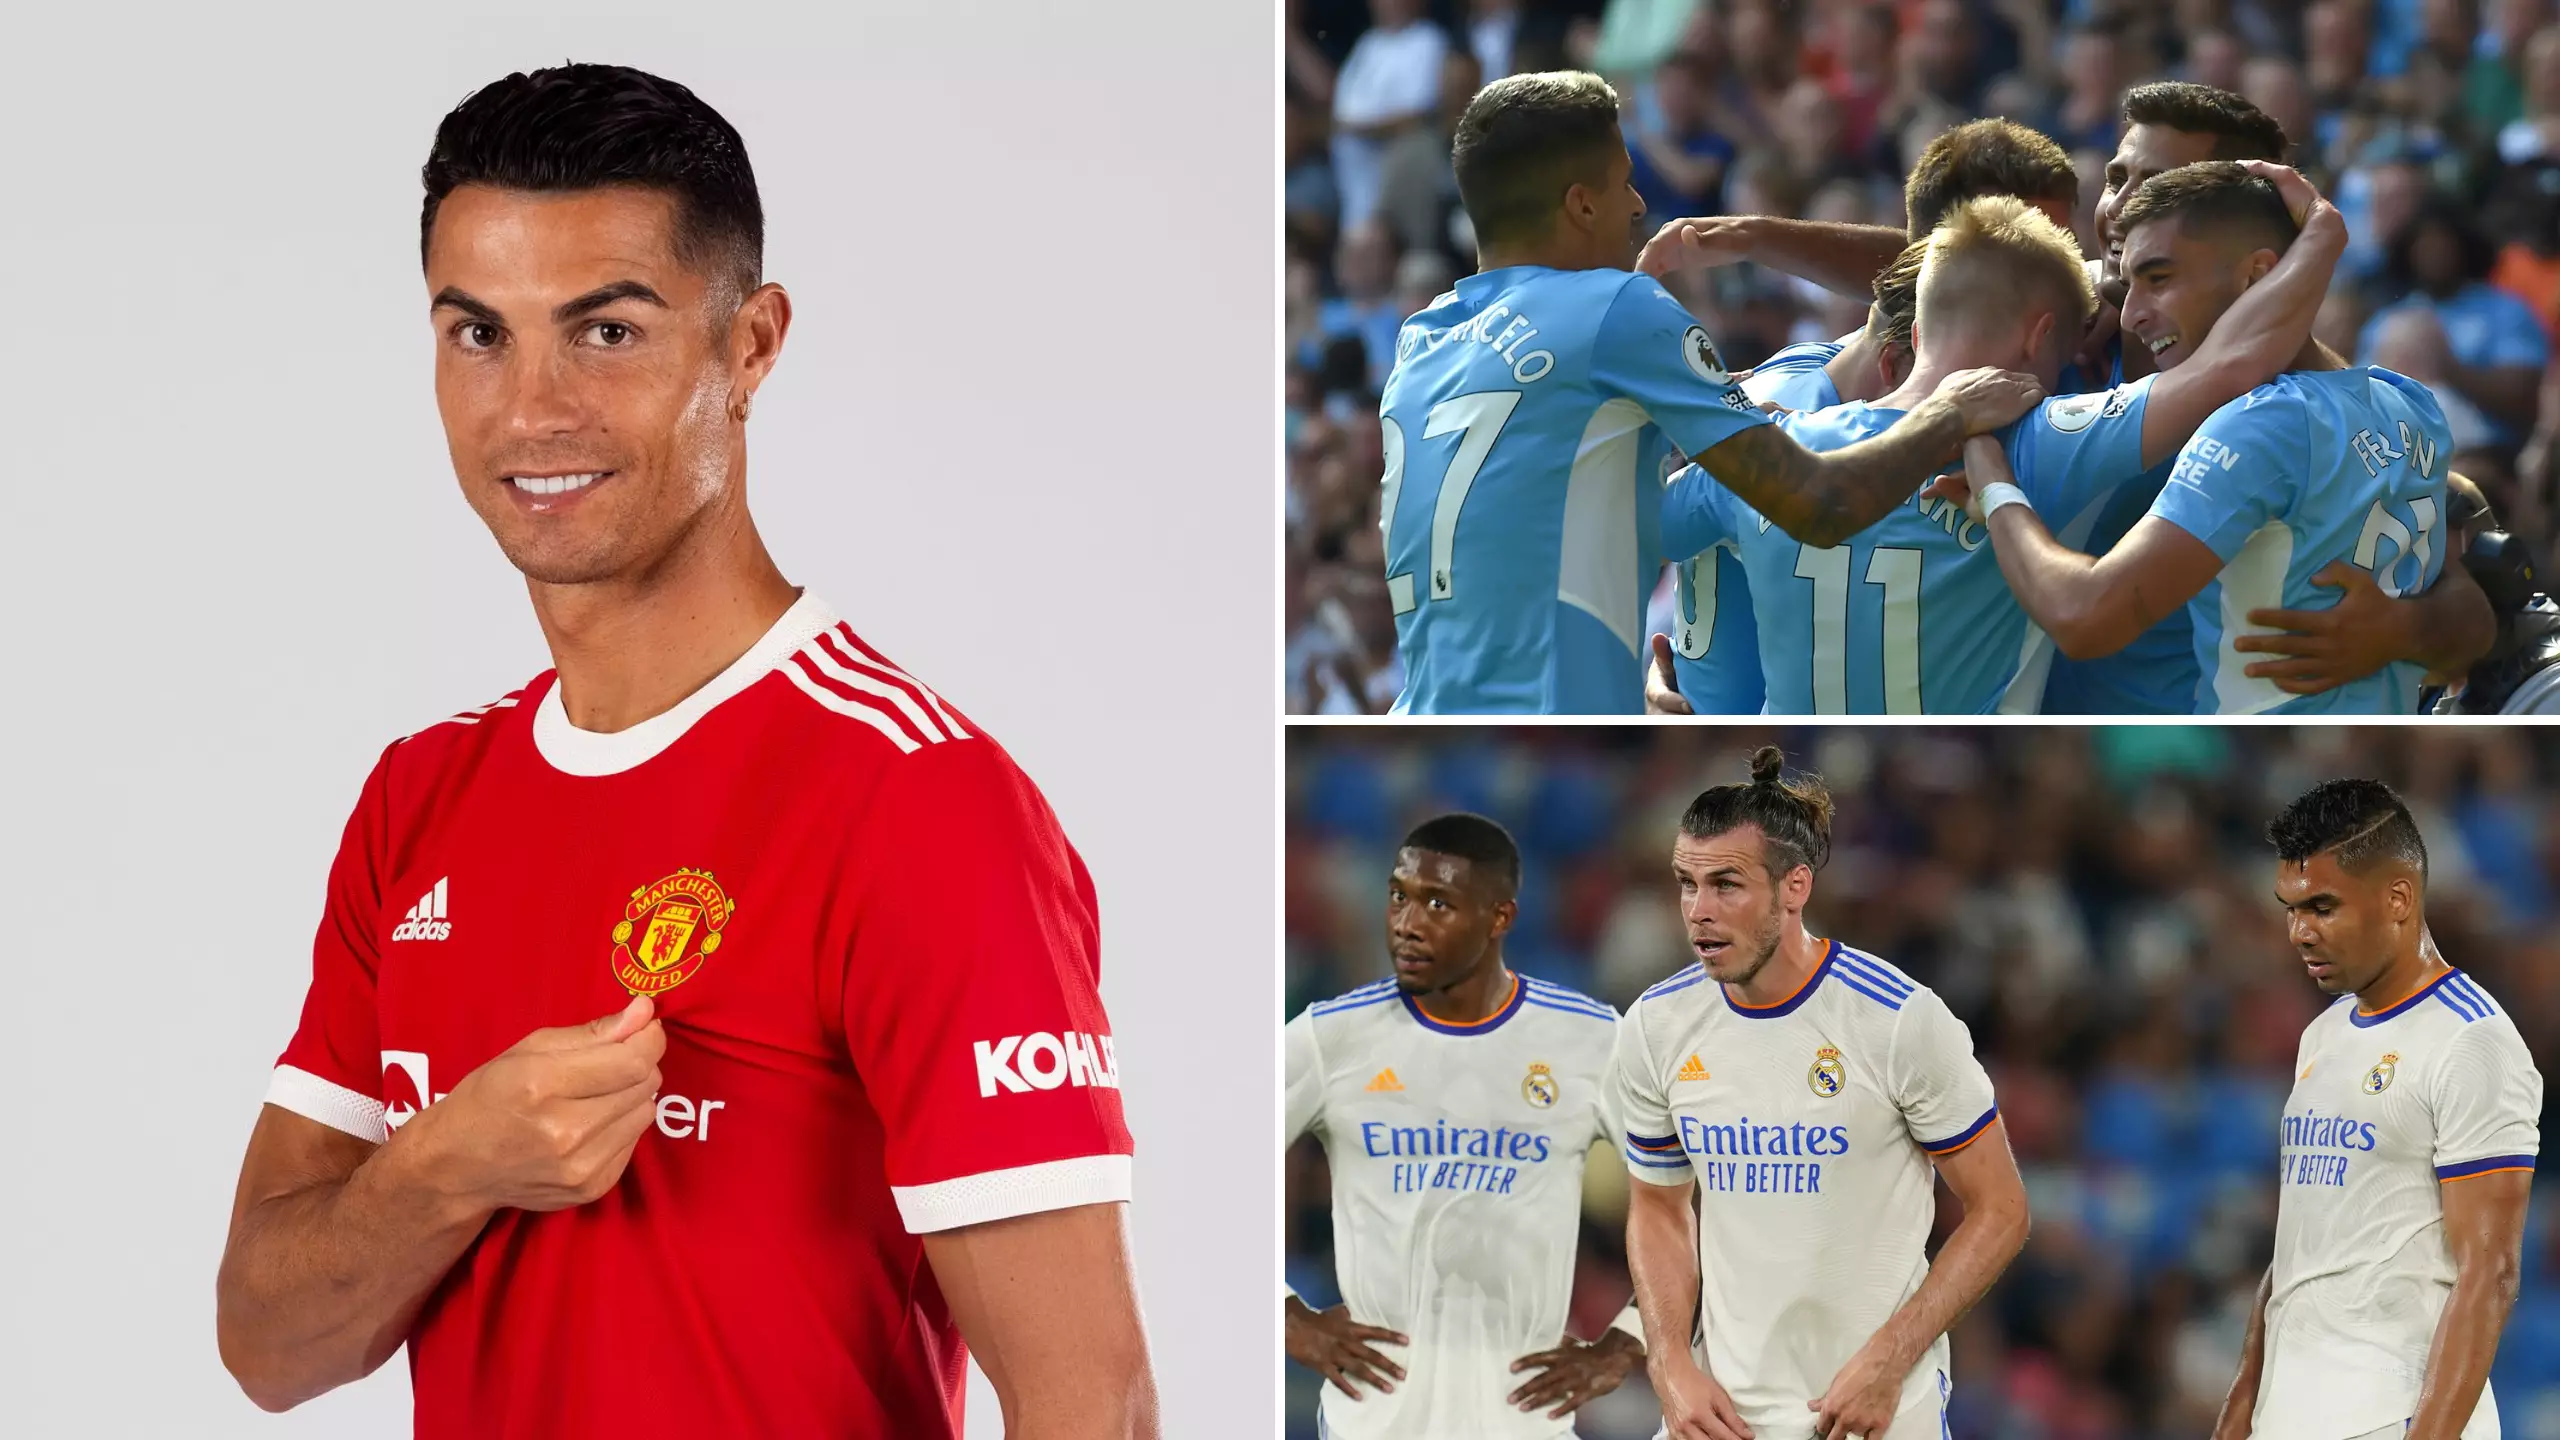 The 10 Most Valuable Squads In Club Football Have Been Named And Ranked